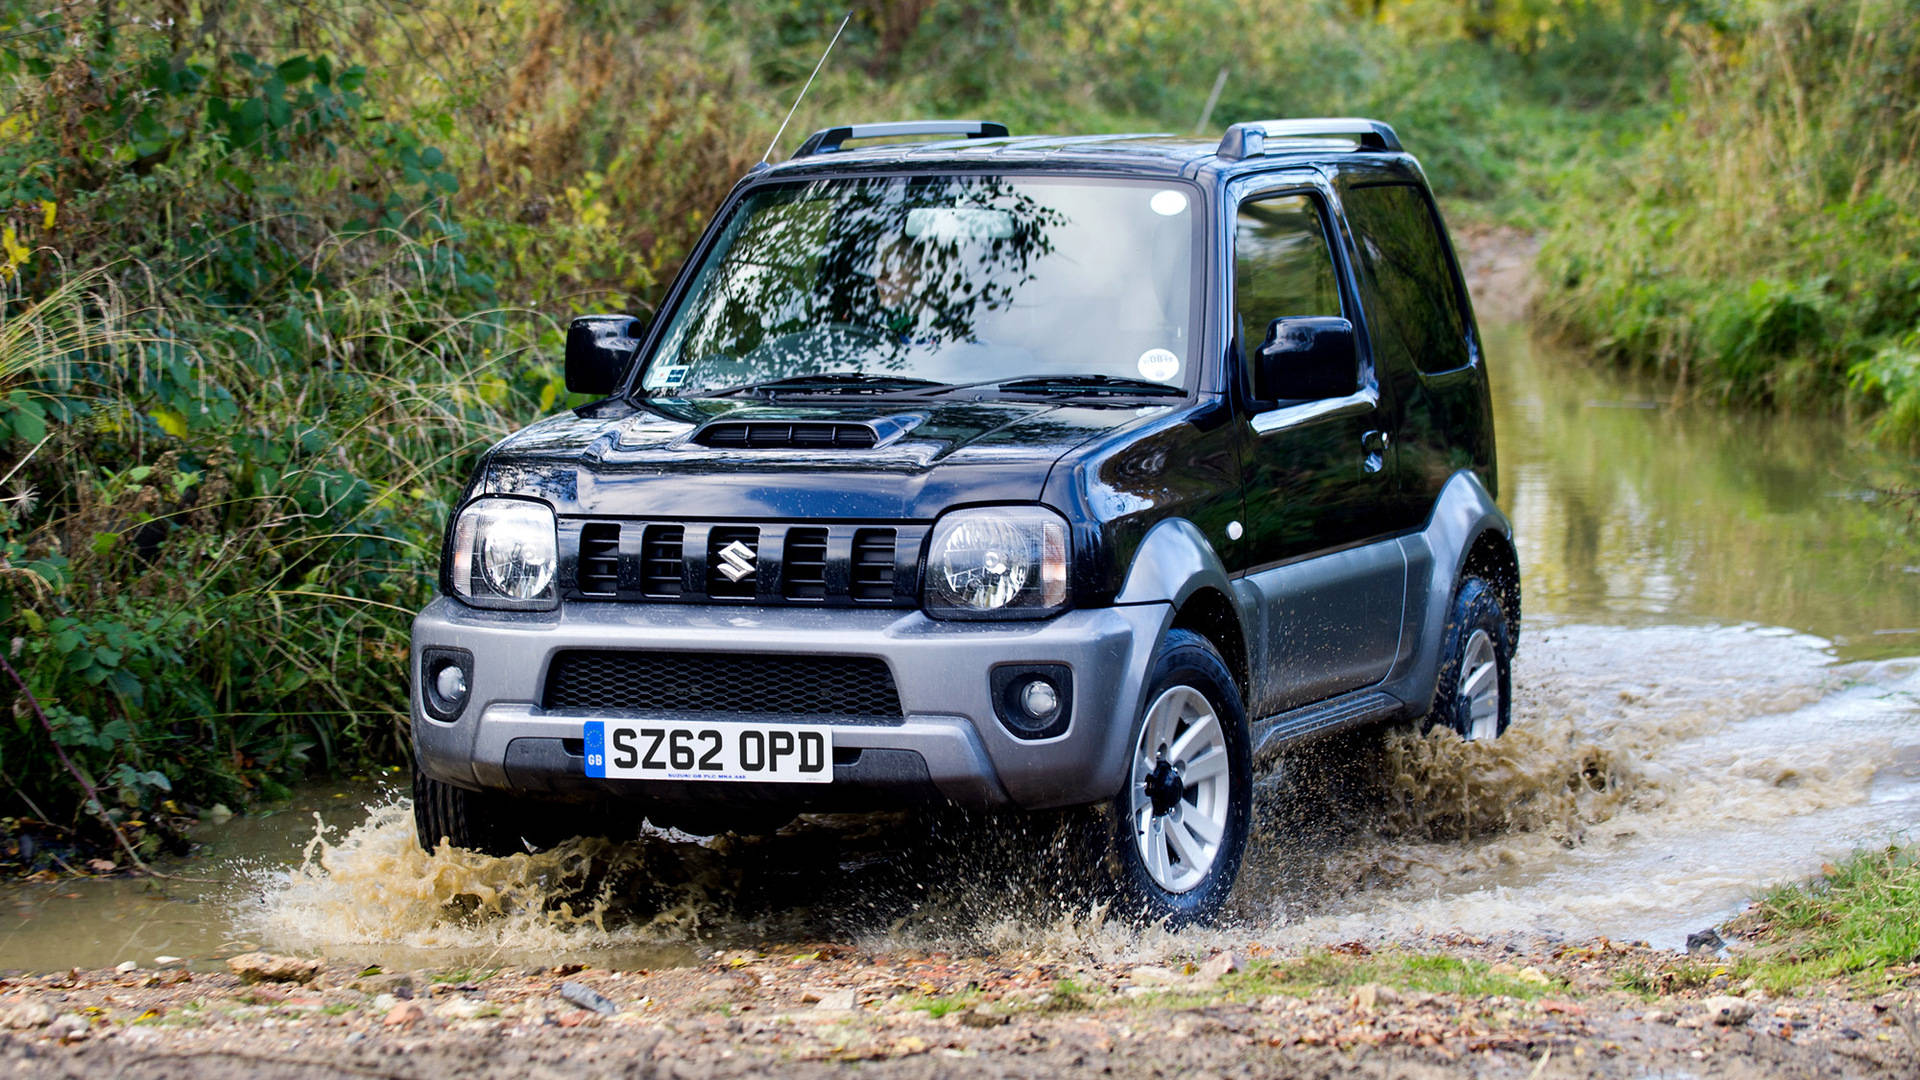 The Endless Road Adventures With The 2012 Suzuki Jimny.